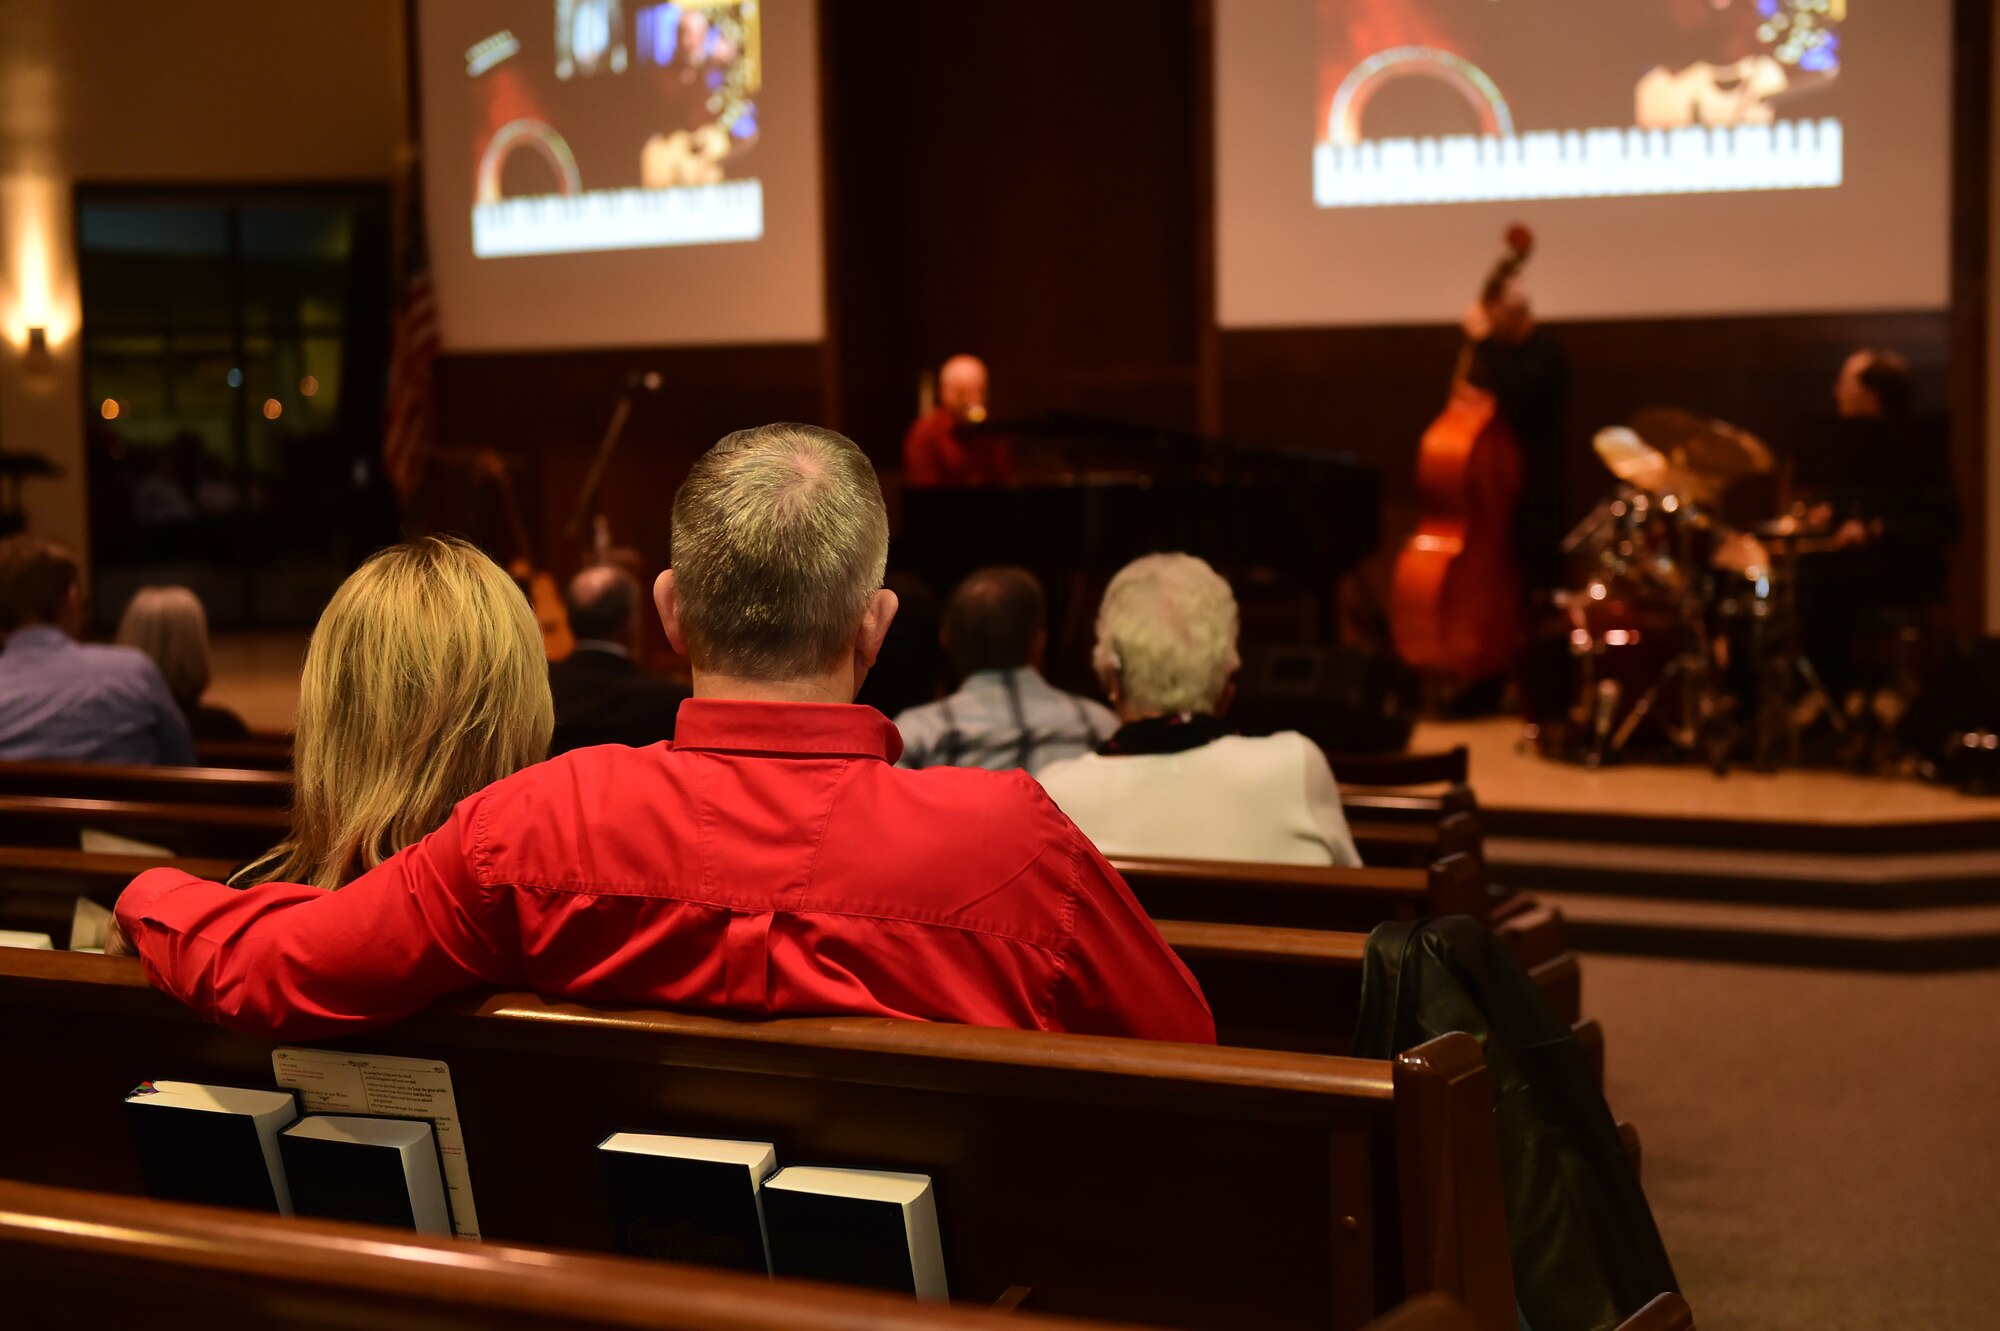 A couple enjoys Danny Byram and his band Feb. 12, 2016, at the Buckley Chapel on Buckley Air Force Base, Colo. Nicknamed “The Combat Musician,” Byram has performed at more than 100 U.S. military installations worldwide, more than any other Christian musician. (U.S. Air Force photo by Airman 1st Class Luke W. Nowakowski/Released)